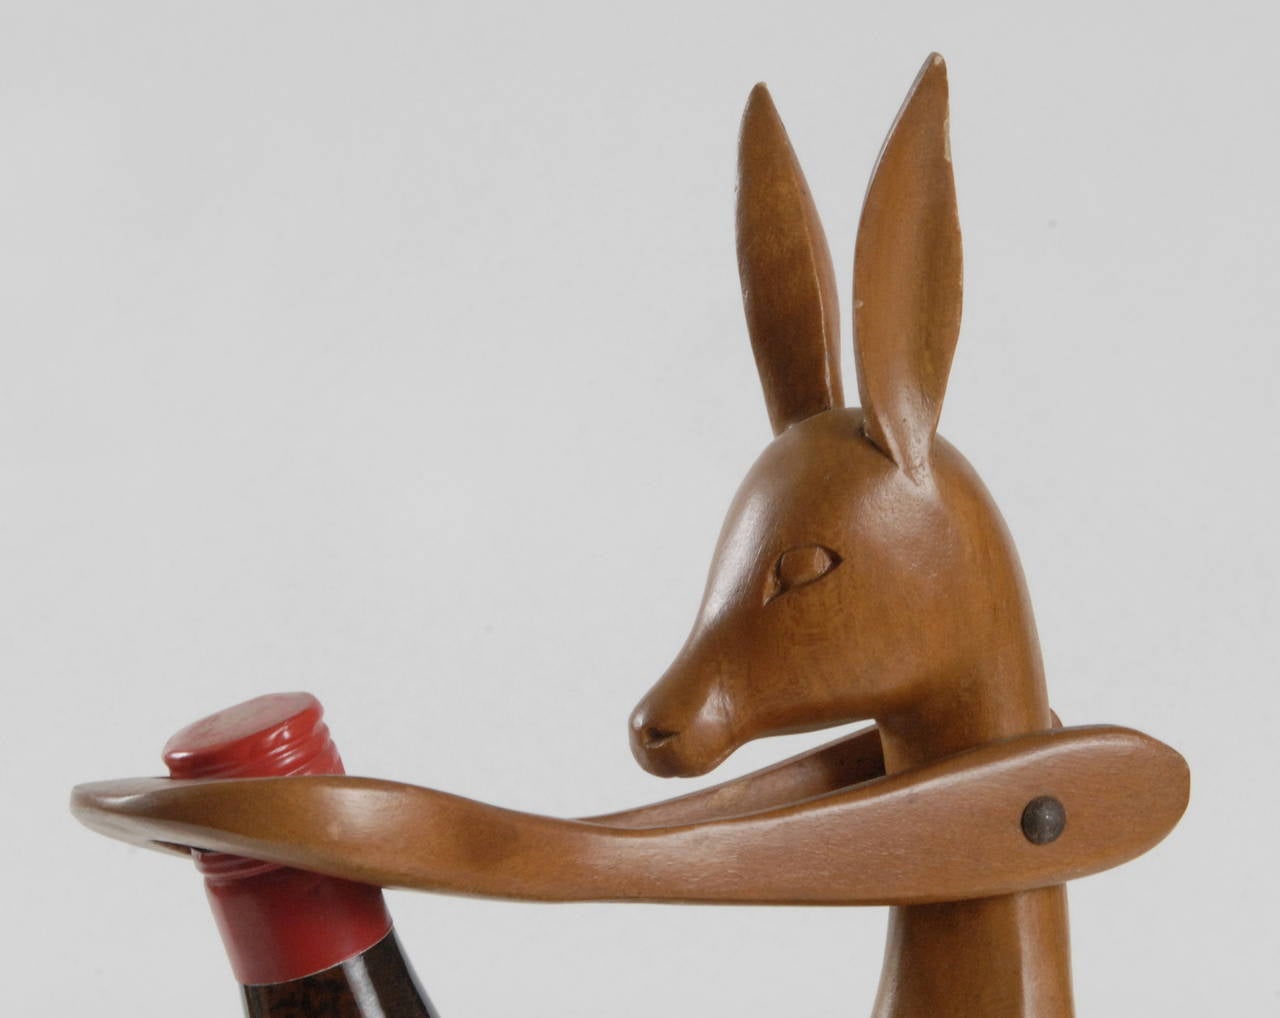 A carved wooden kangaroo bottle holder or pourer. Dating from the 1950s this has been carved from one piece of timber with the upper arms hinged to hold the bottle and rise to allow removal.